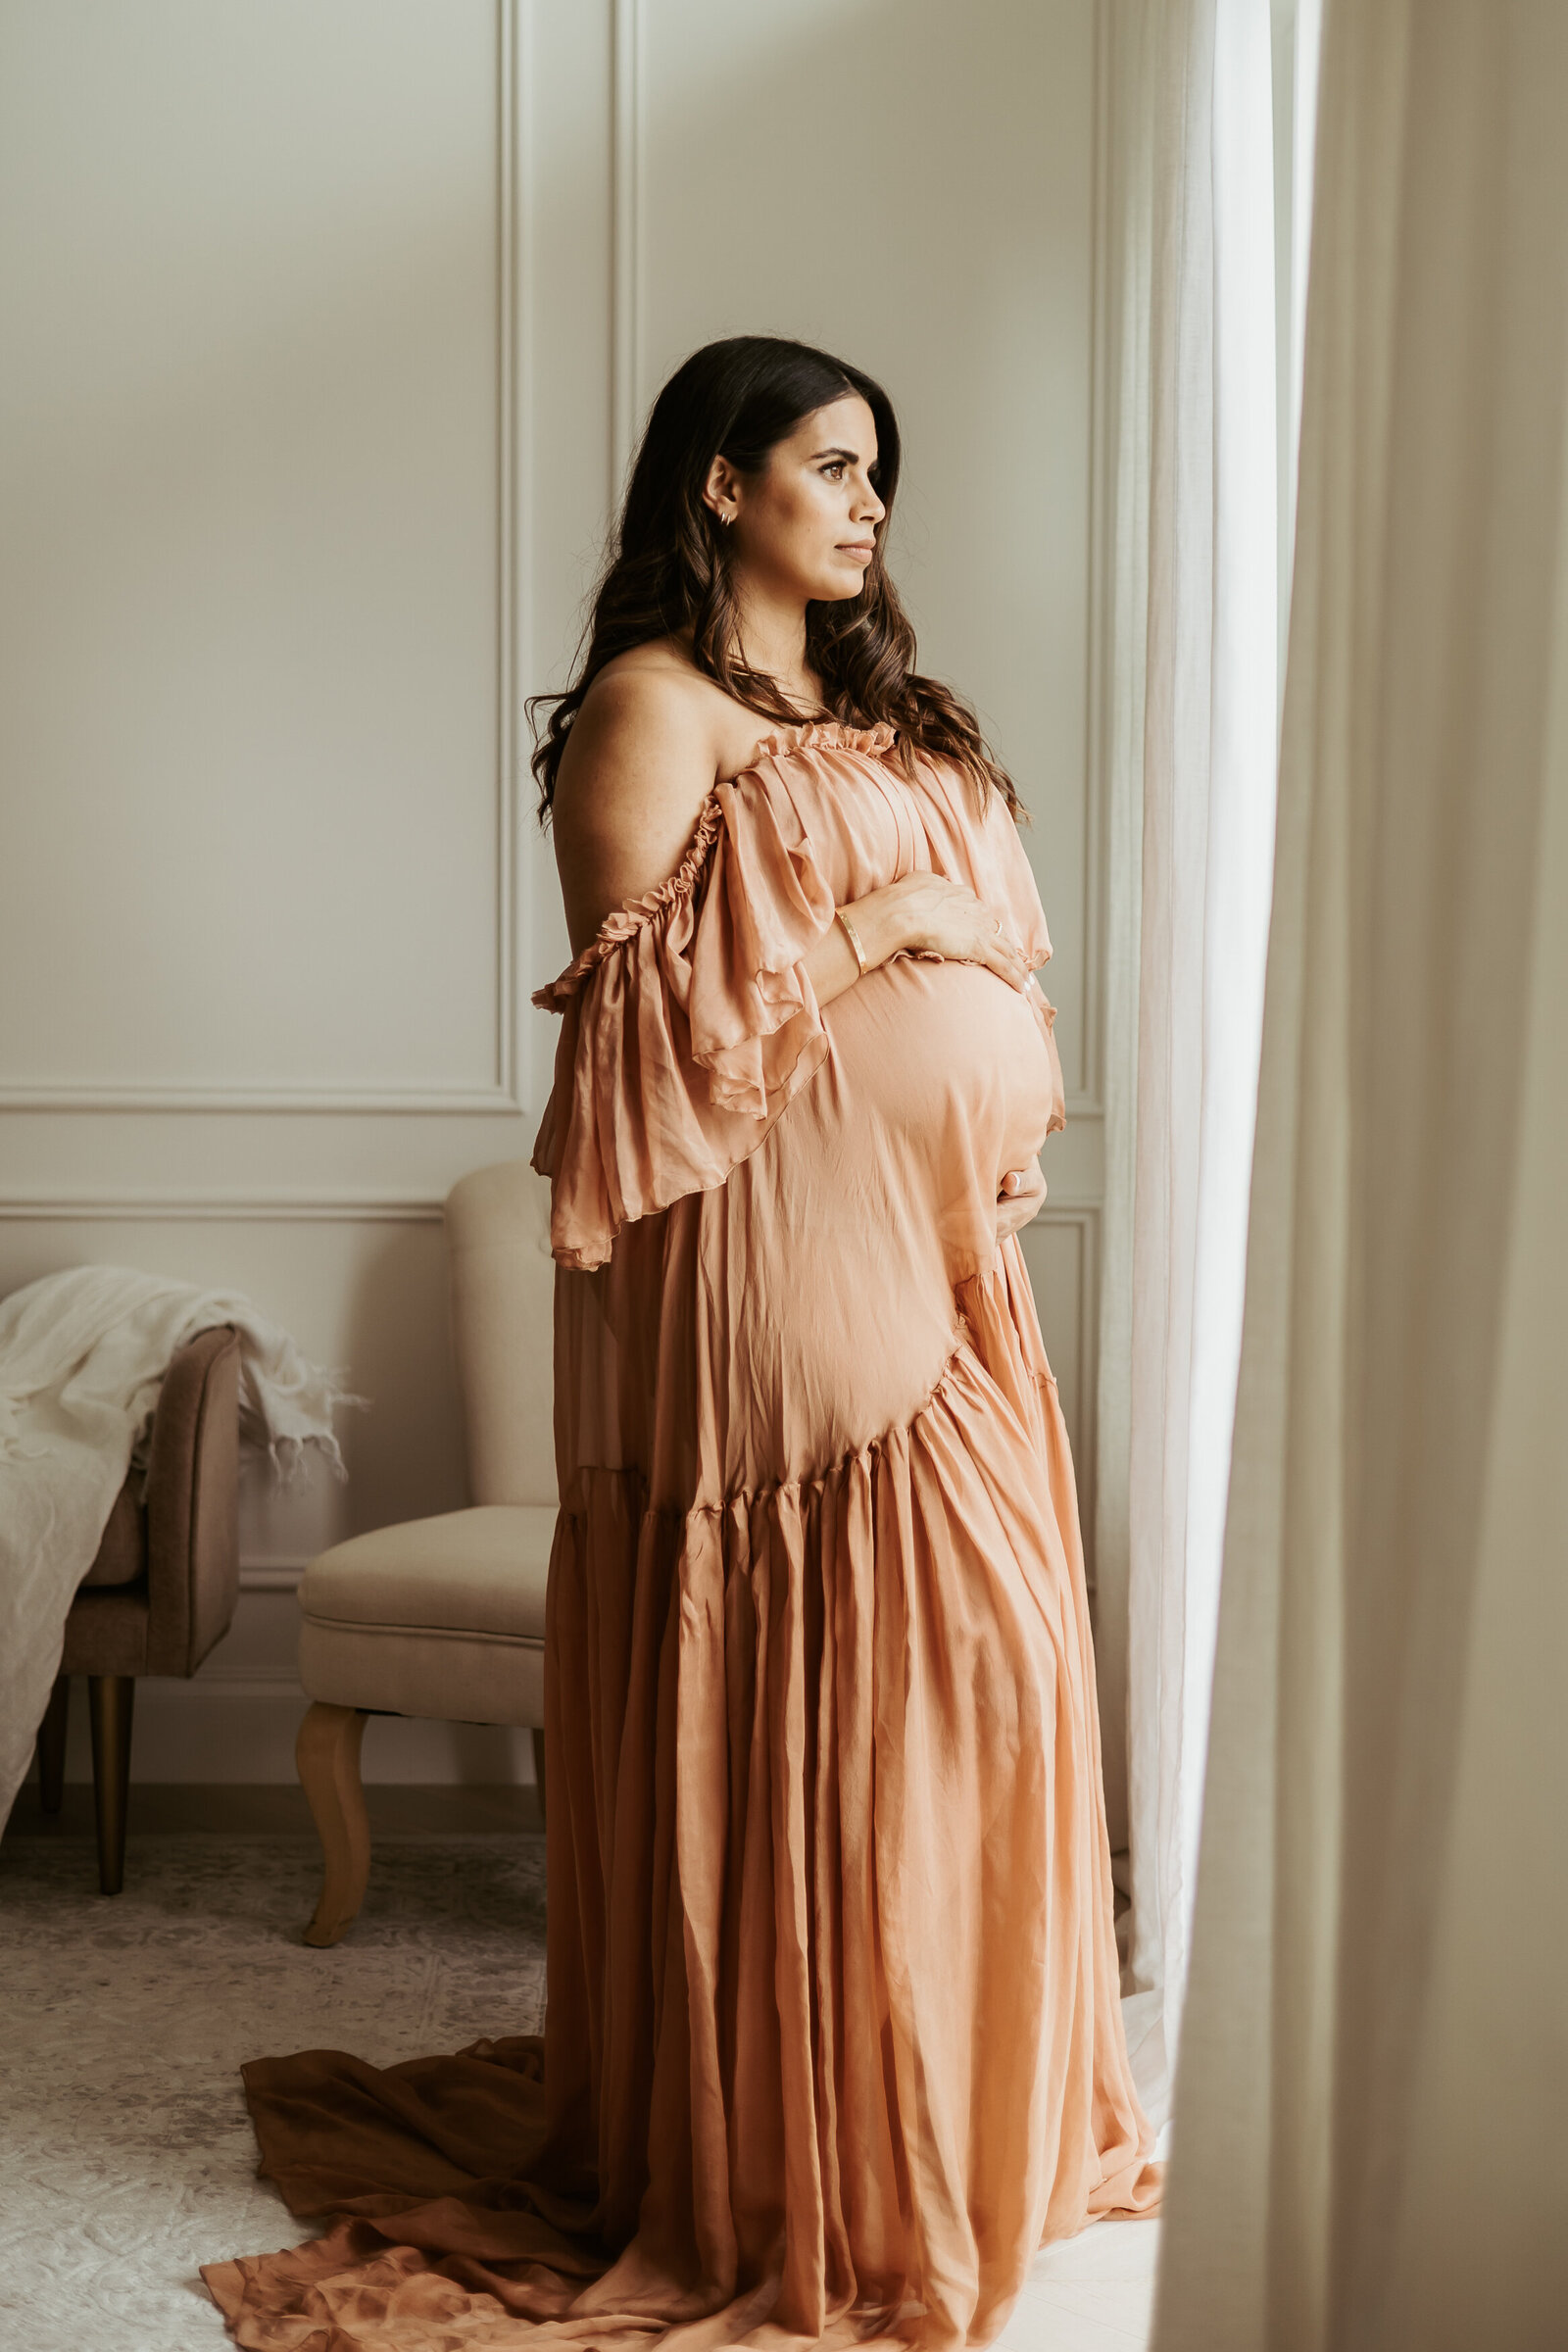 Pregnant mama in a long brown silk dress cradling her bump in front of a window